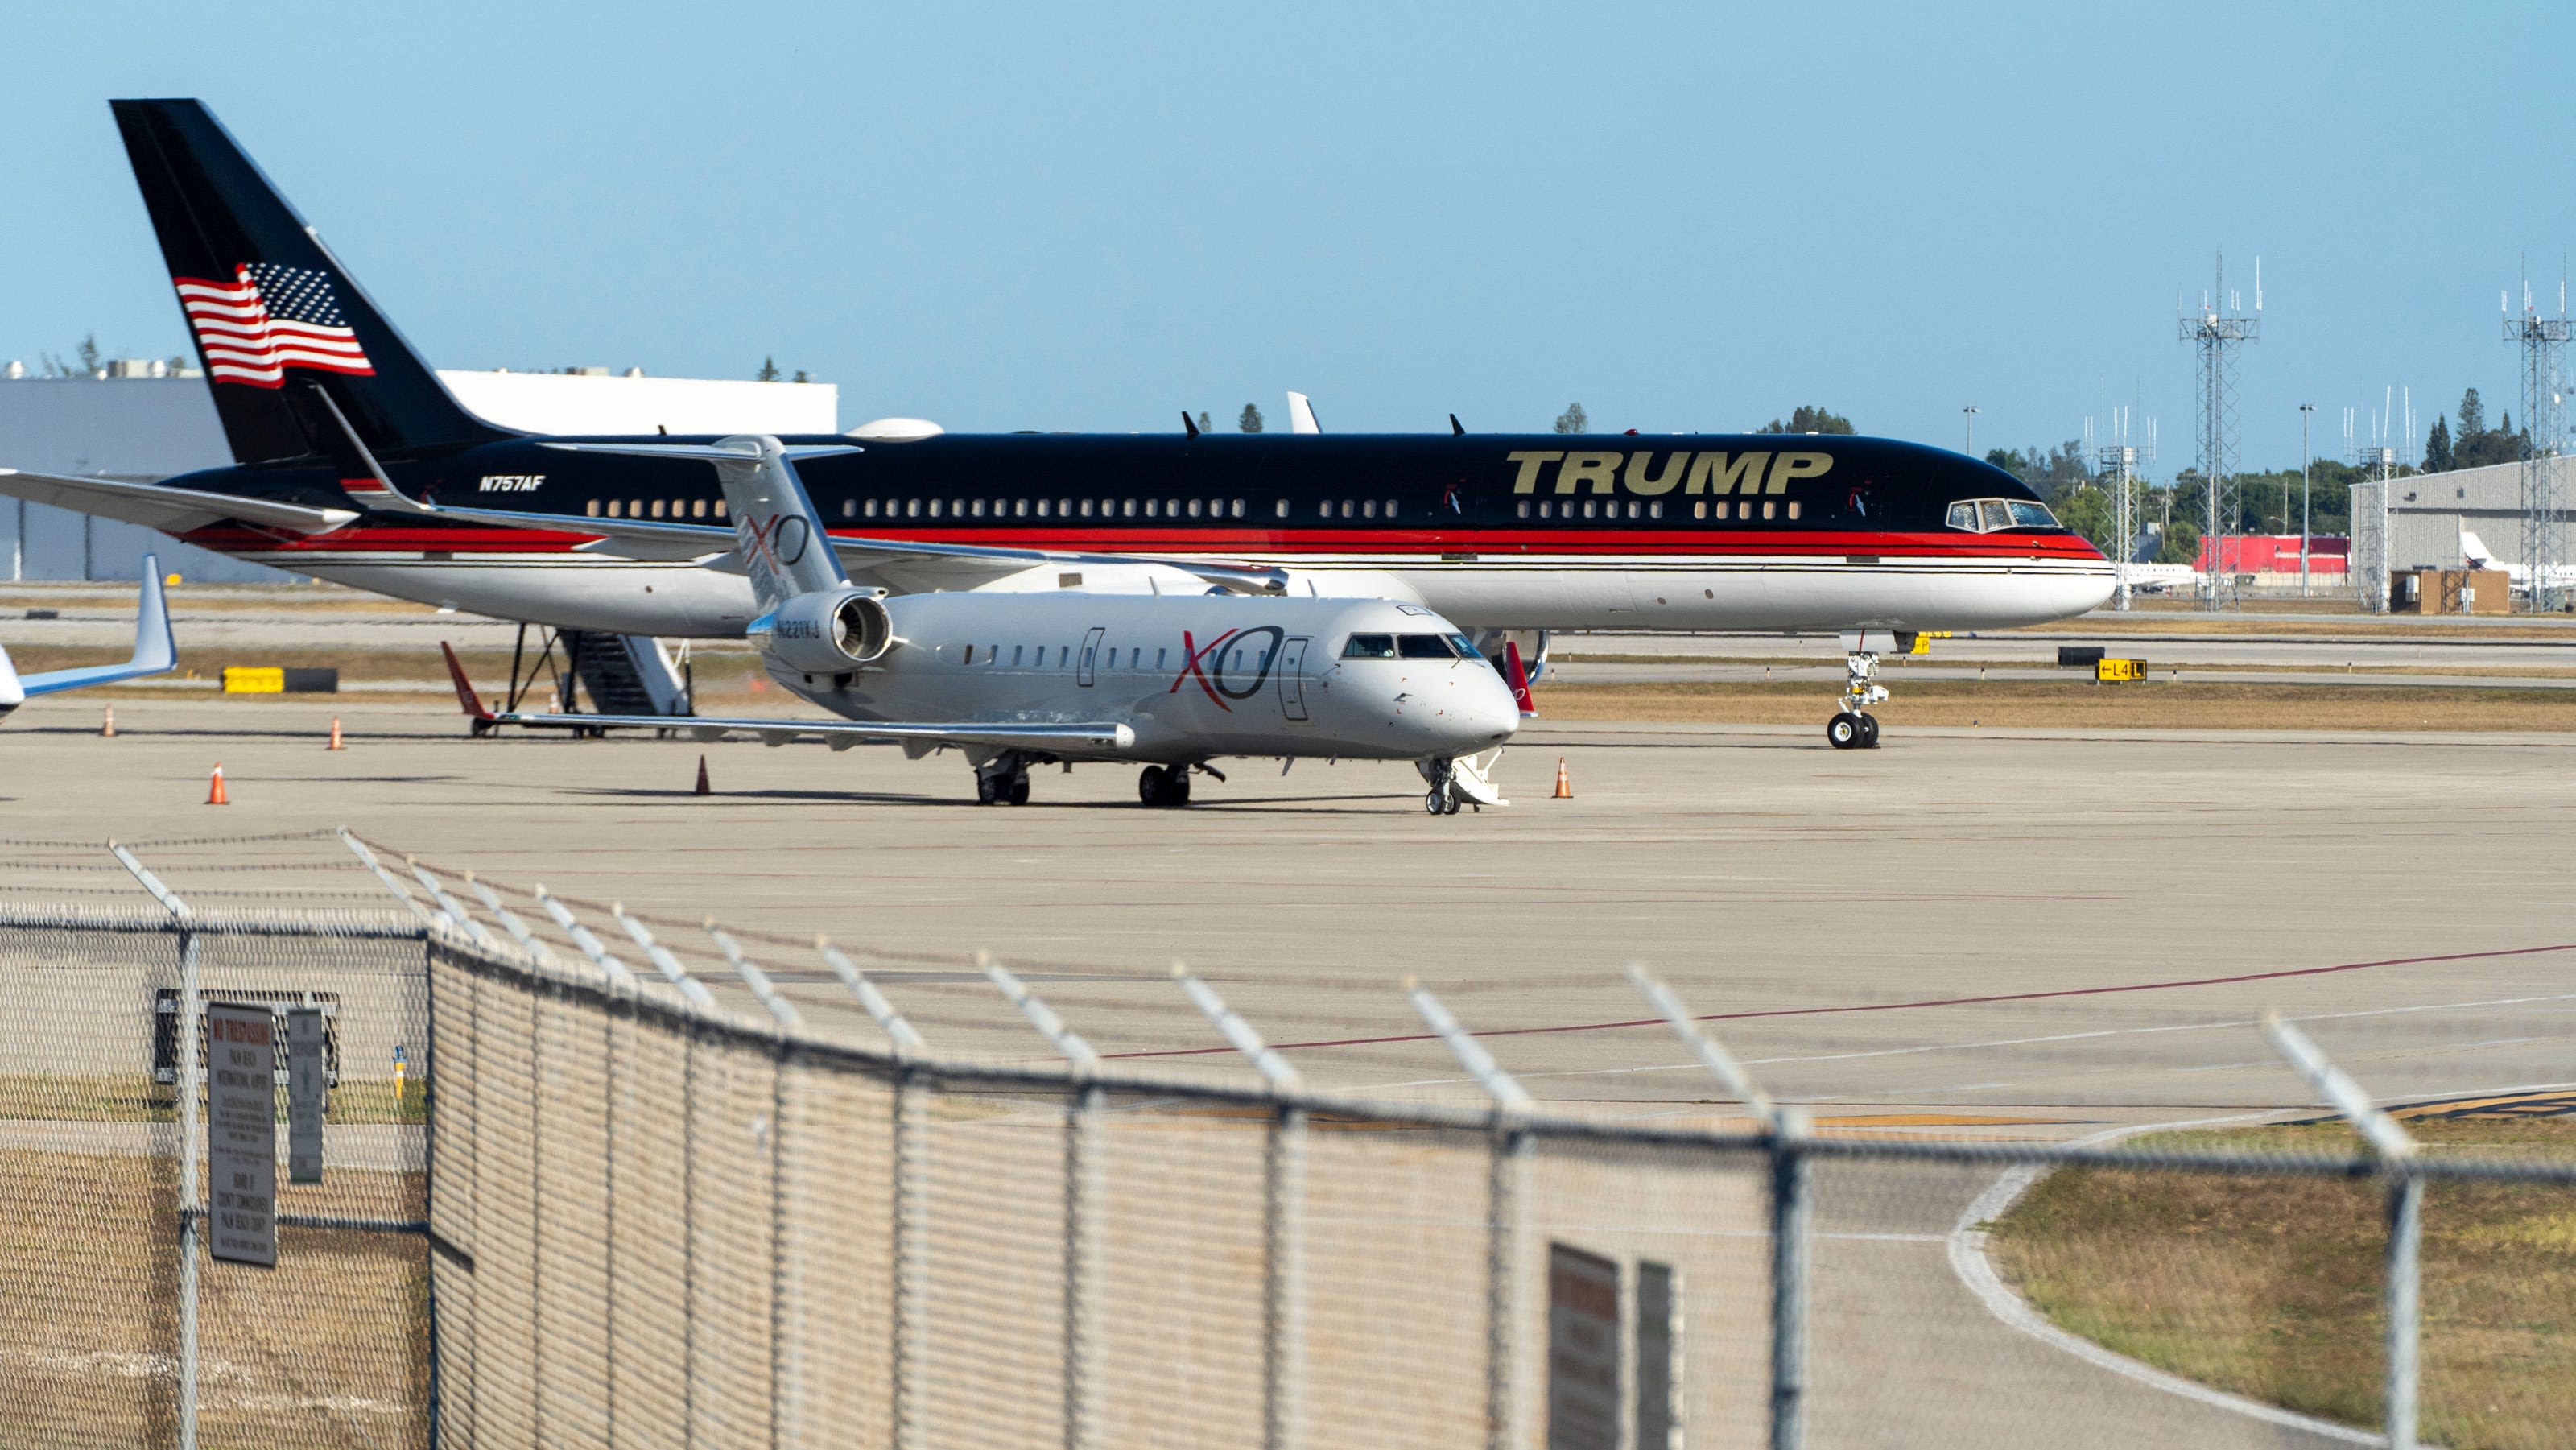 Trump's plane clips another jet's wings after late-night landing at PBIA; FAA investigates